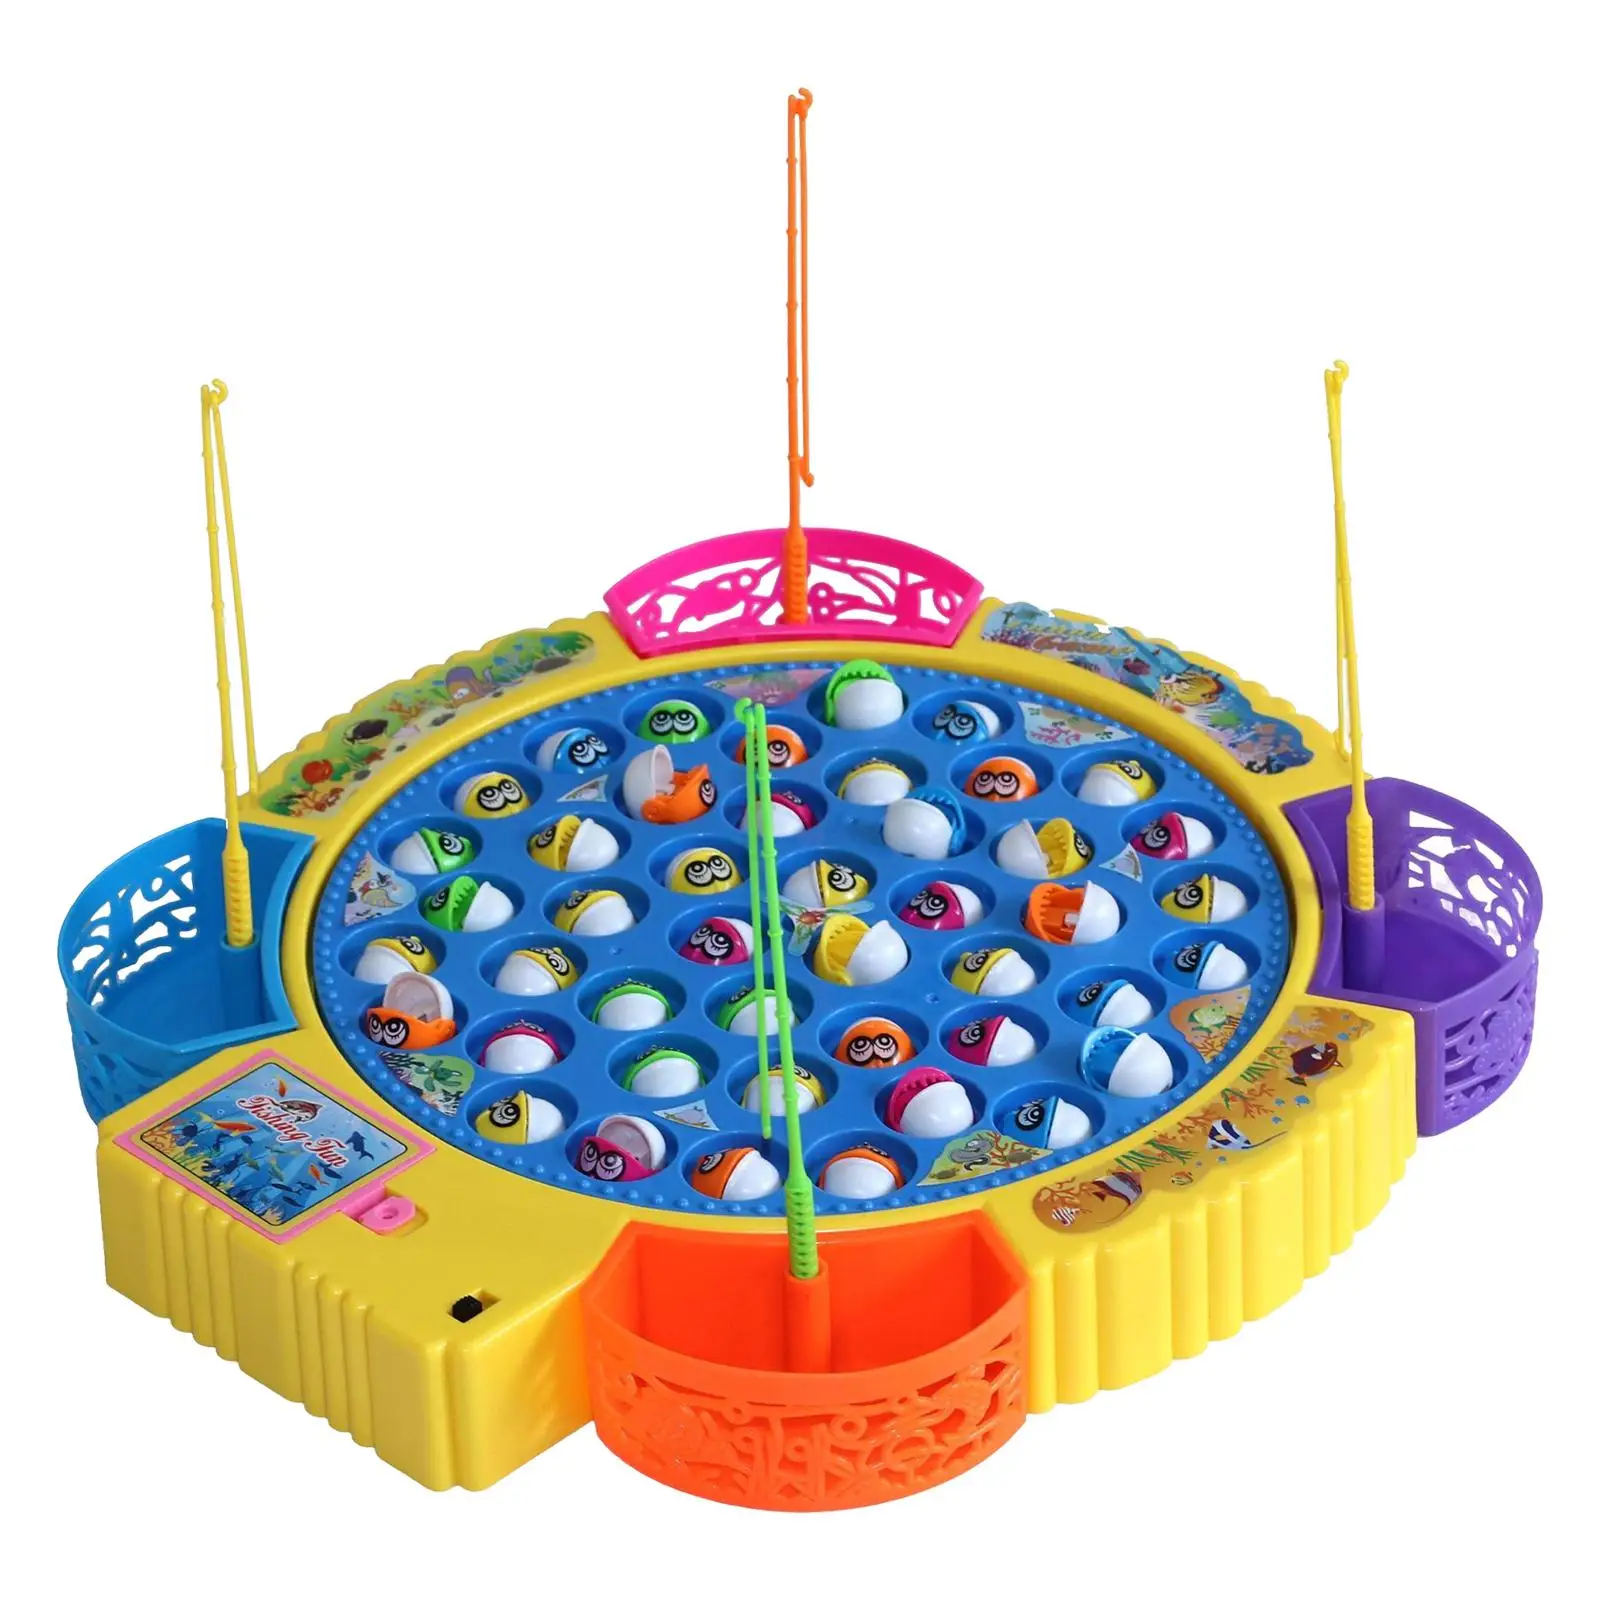 Novelty Rotating Fishing Game Kids Toy Ability Training for Educational toy, kids Children